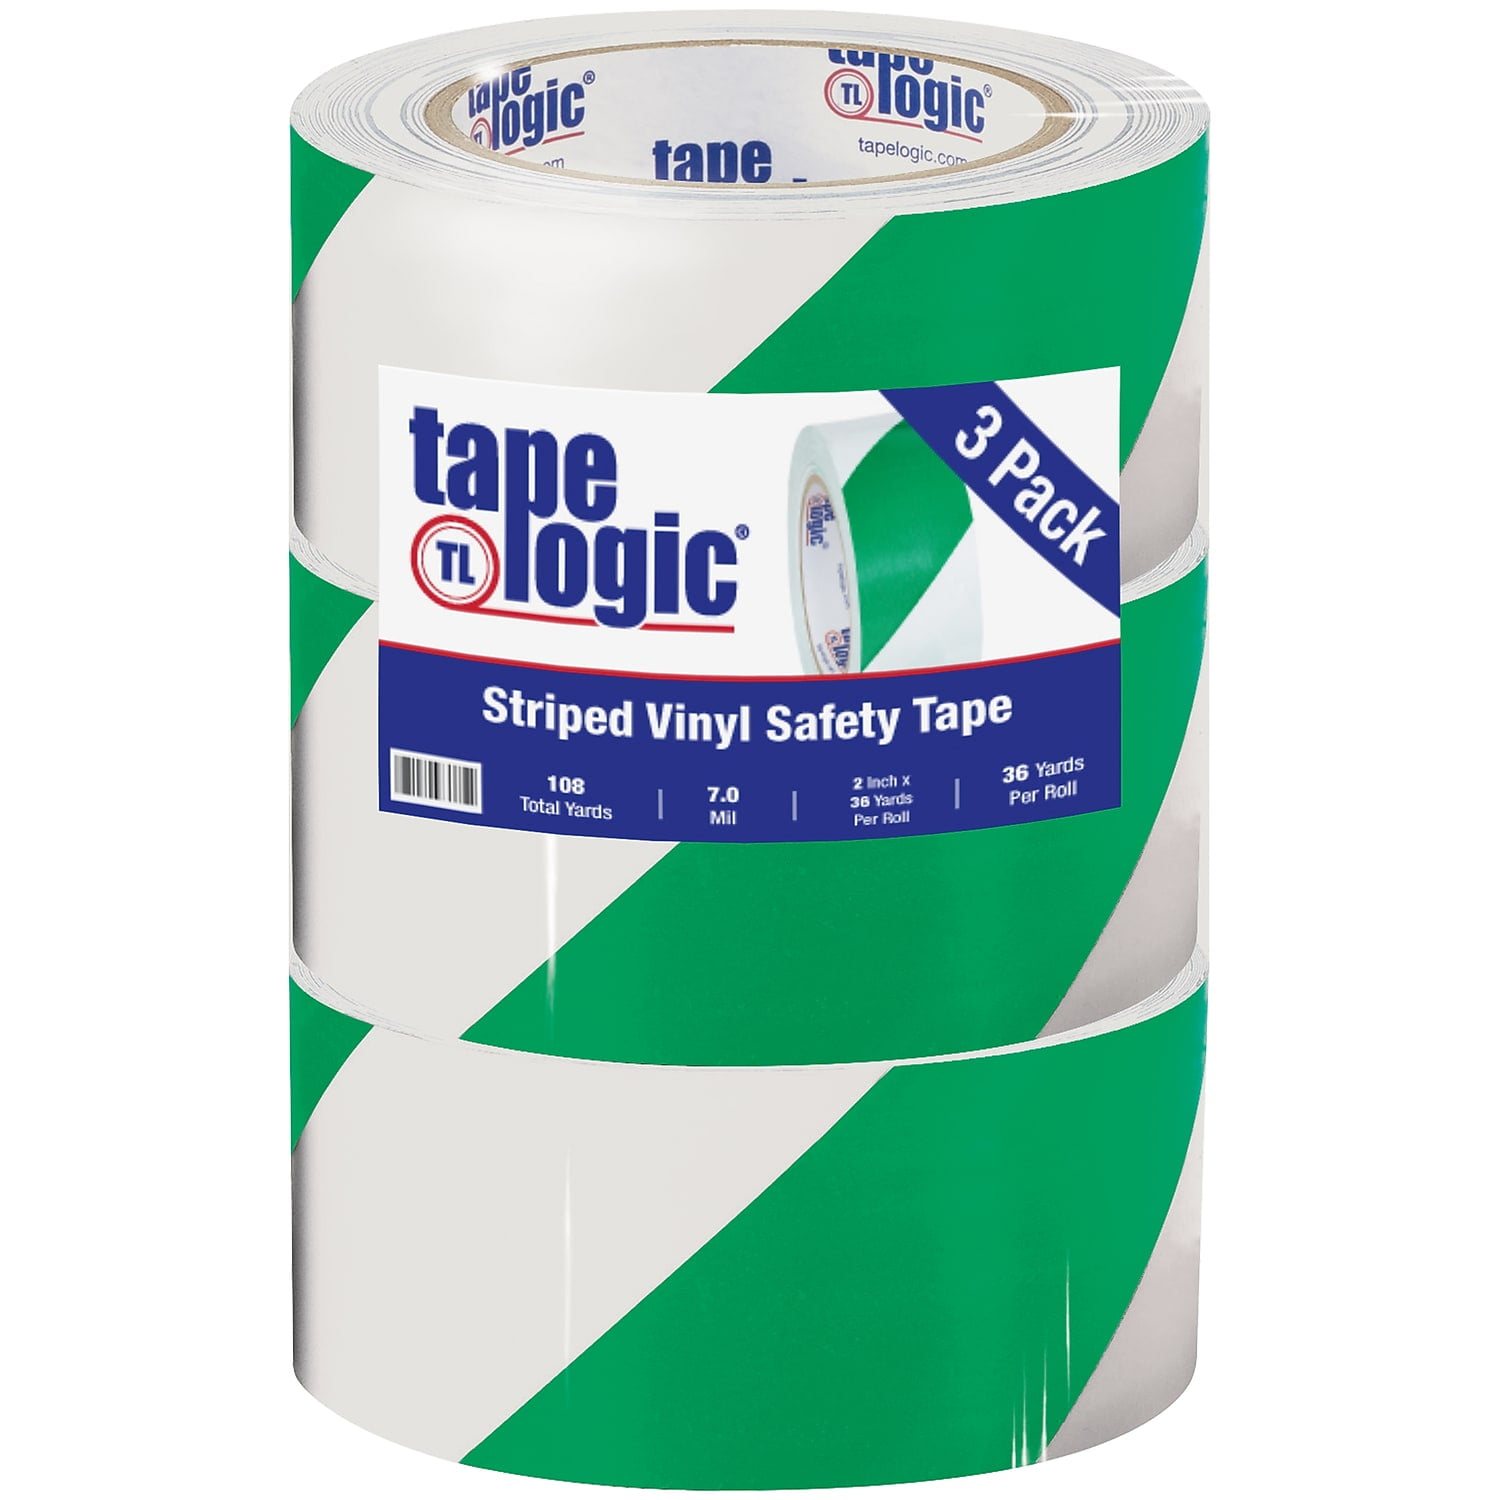 Tape Logic T92363pkgw 2 In. X 36 Yards Green & White Striped Vinyl Safety Tape - Pack Of 3